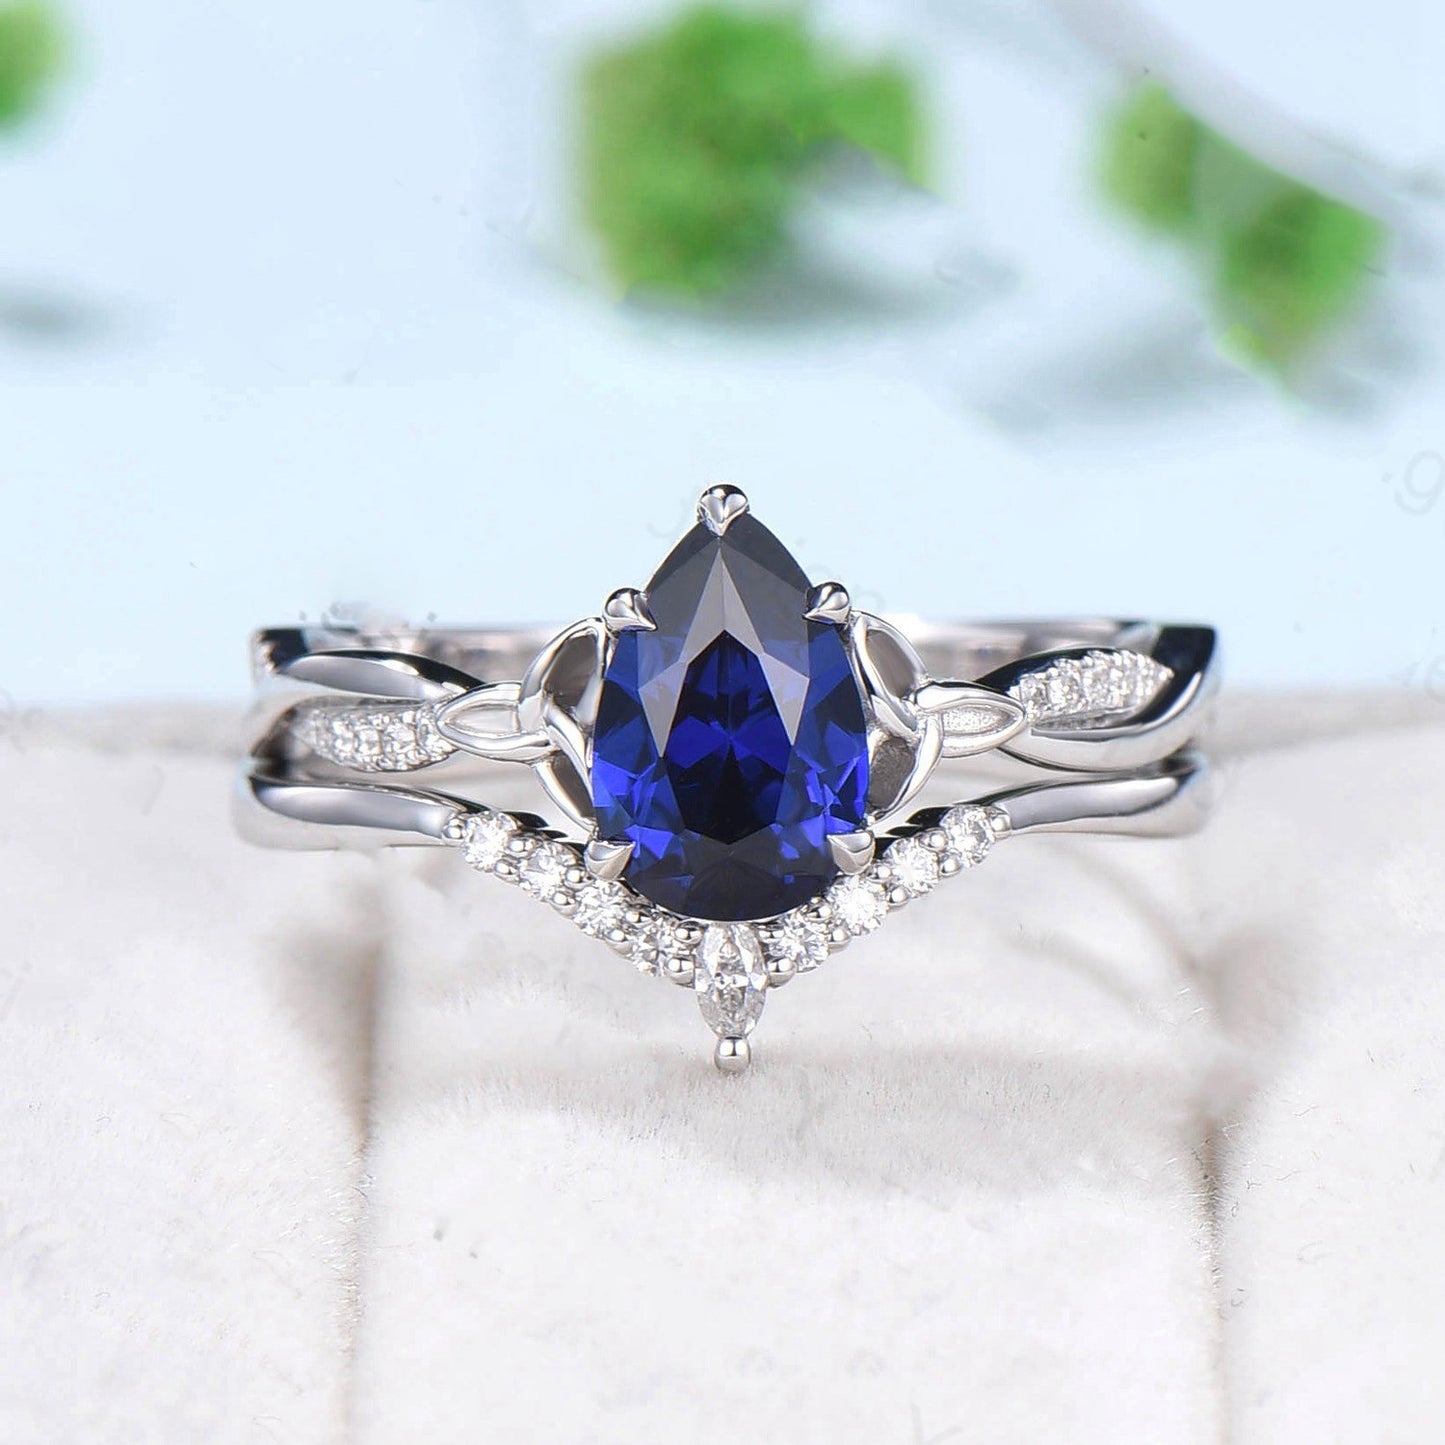 Vintage Sapphire Ring Bridal Set Norse Viking 6x9mm pear shaped sapphire engagement ring set Unique twisted infinity wedding set for women - PENFINE